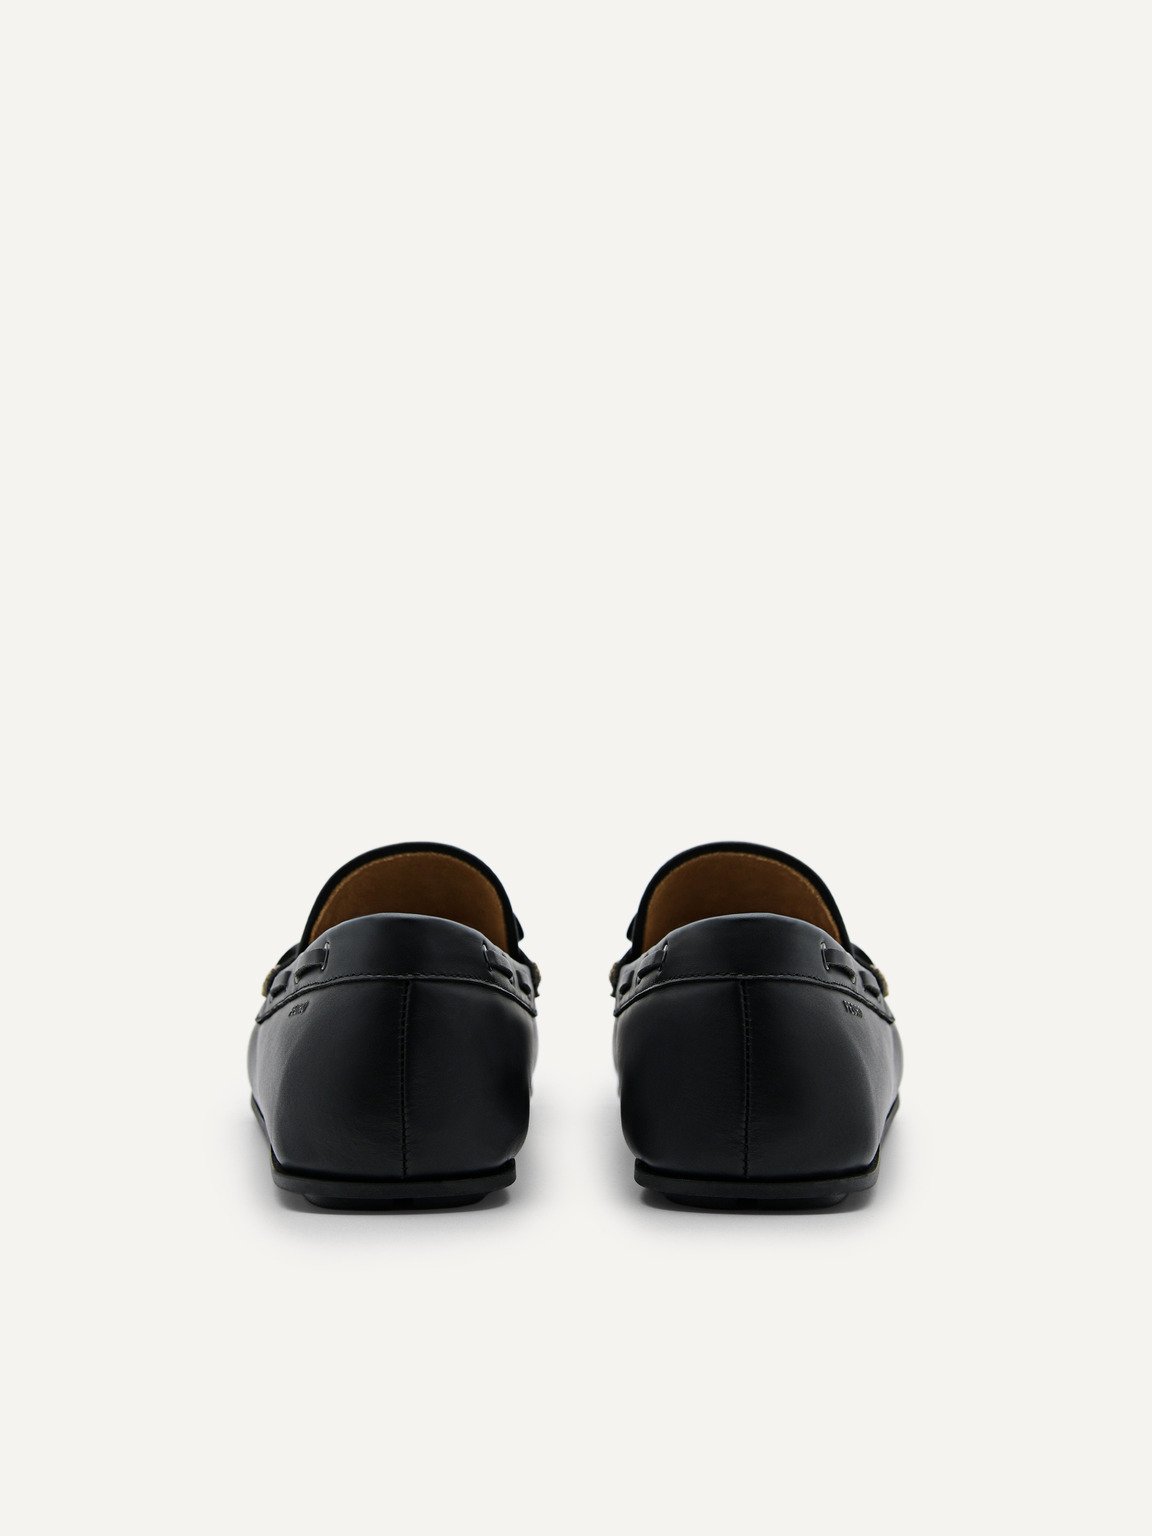 Leather Bow Driving Shoes, Black